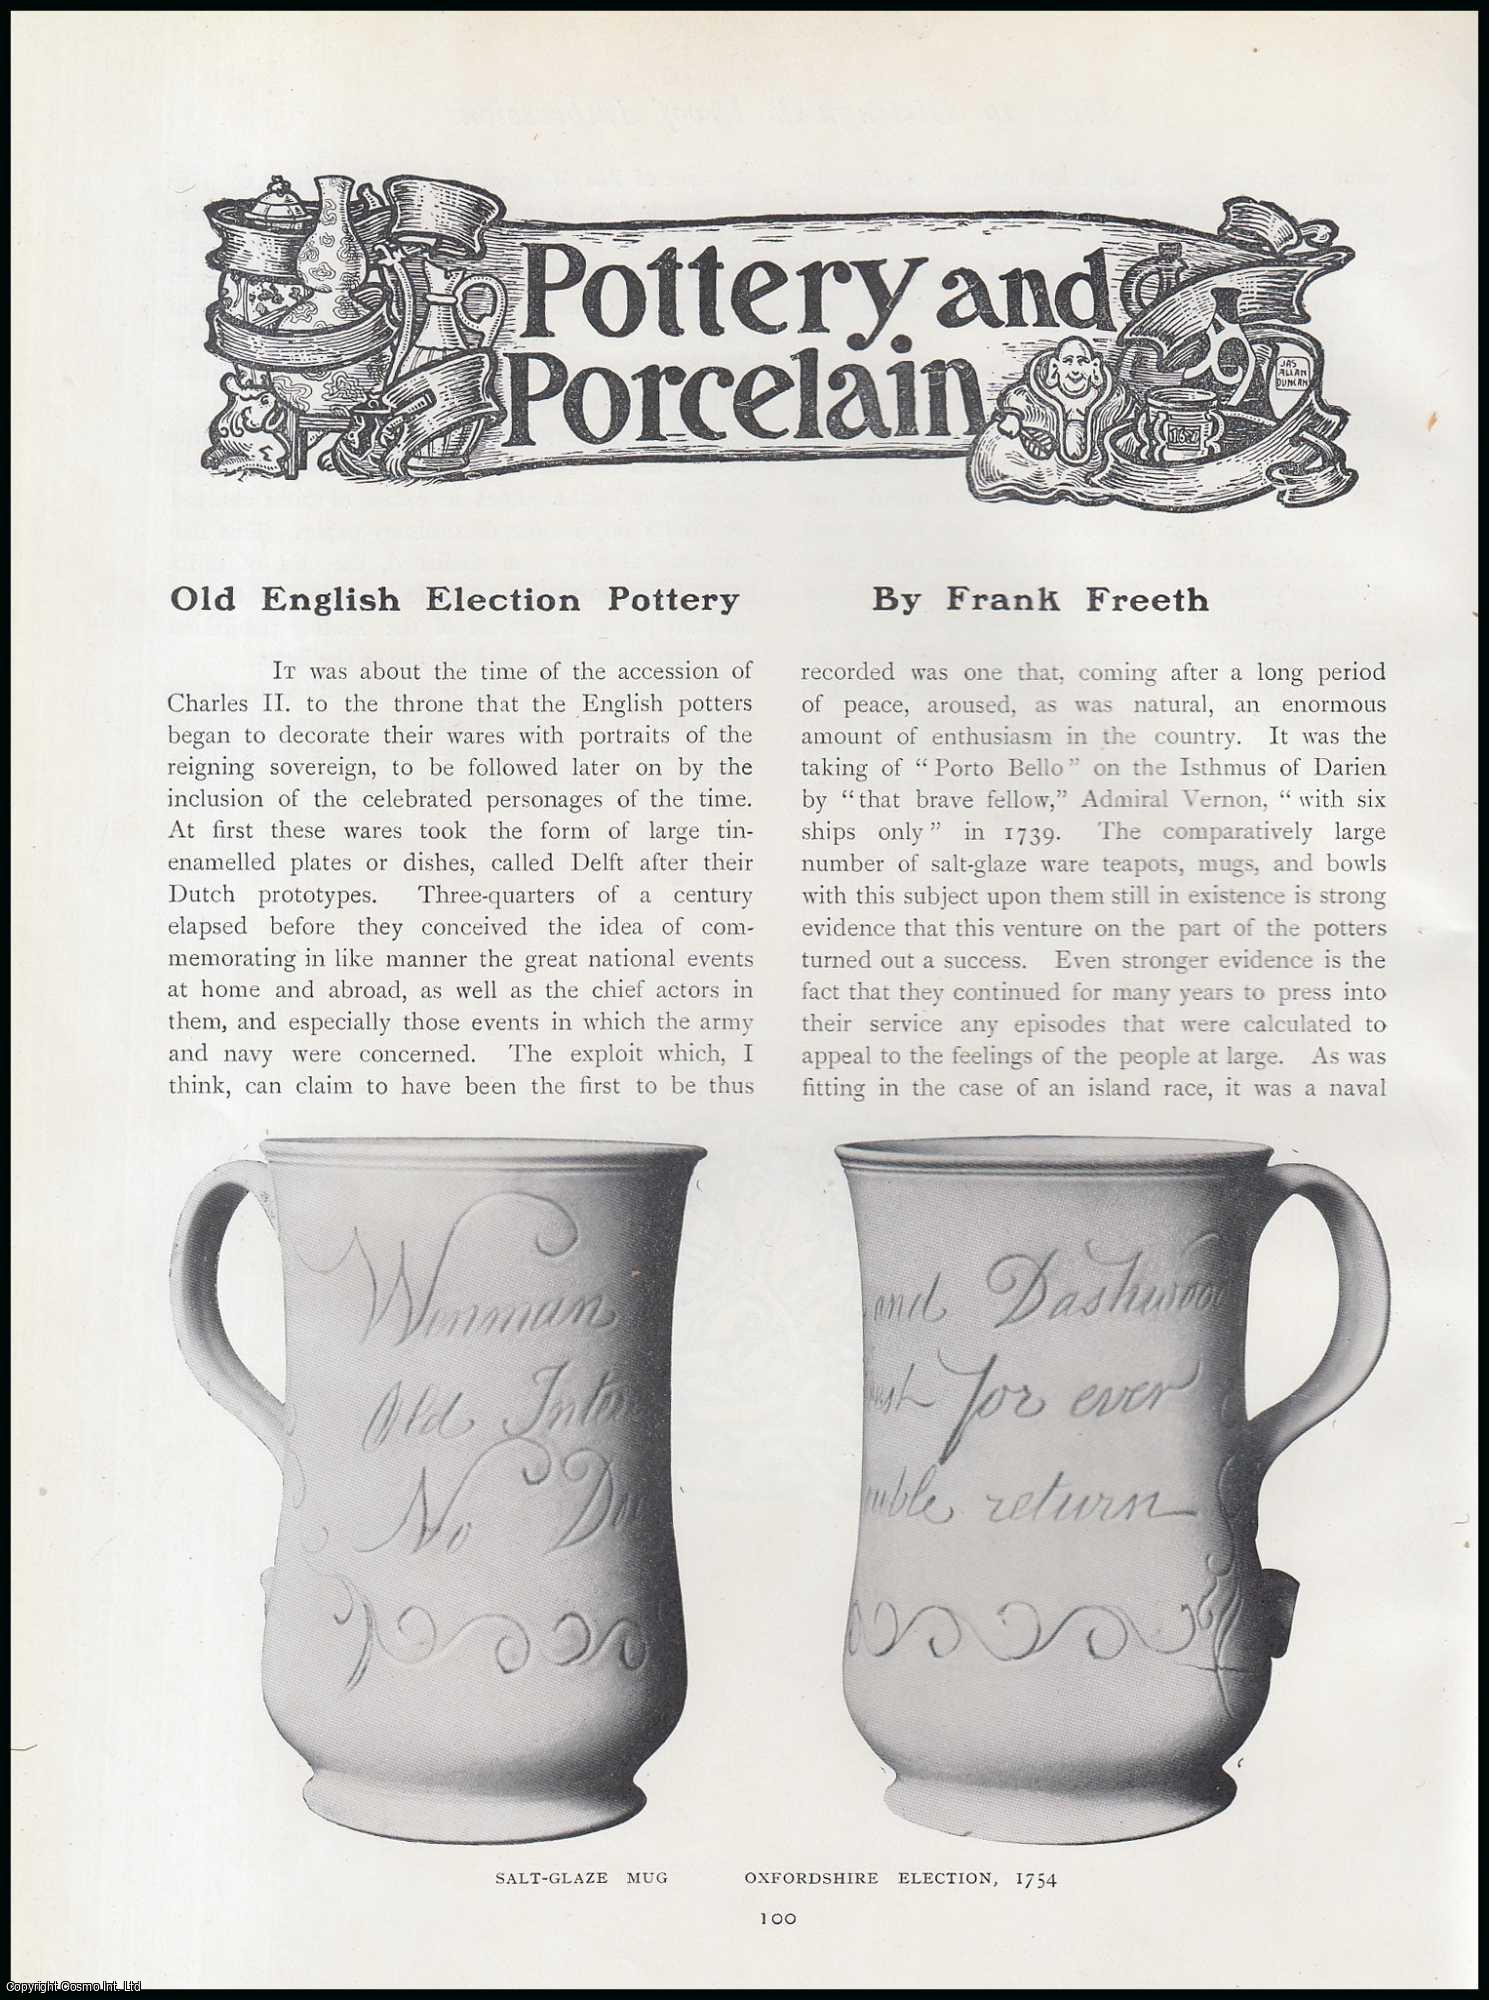 Frank Freeth - Old English Election Pottery. An original article from The Connoisseur, 1910.